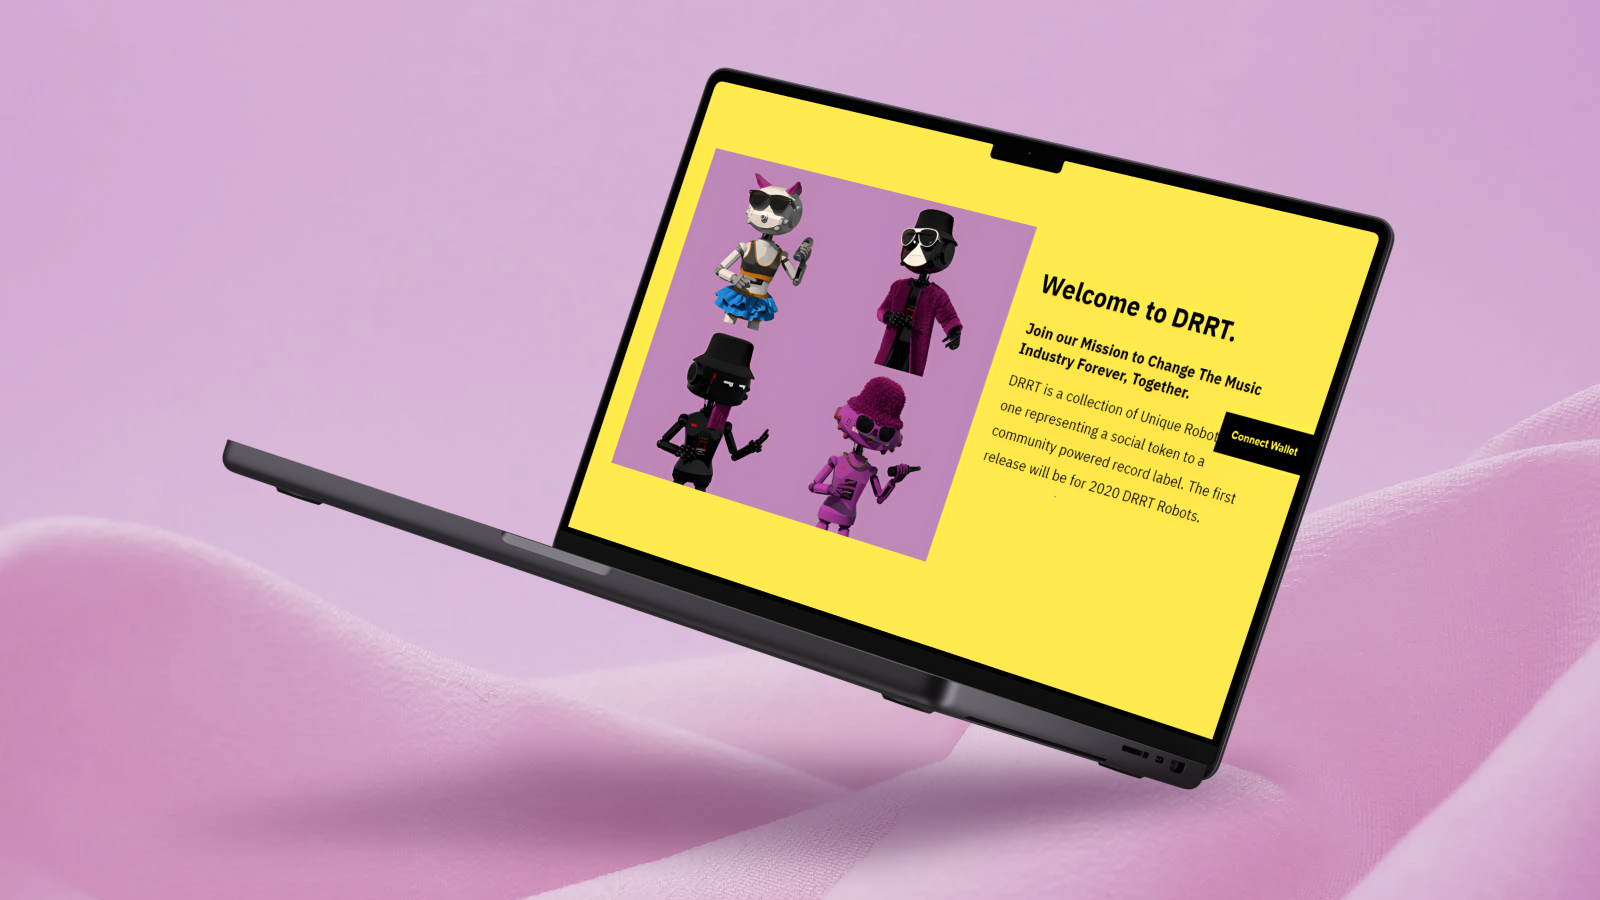 The levitating laptop showcases the NFT marketplace's homepage, featuring DRRT robots, with predominant colors of yellow, pink, and black.